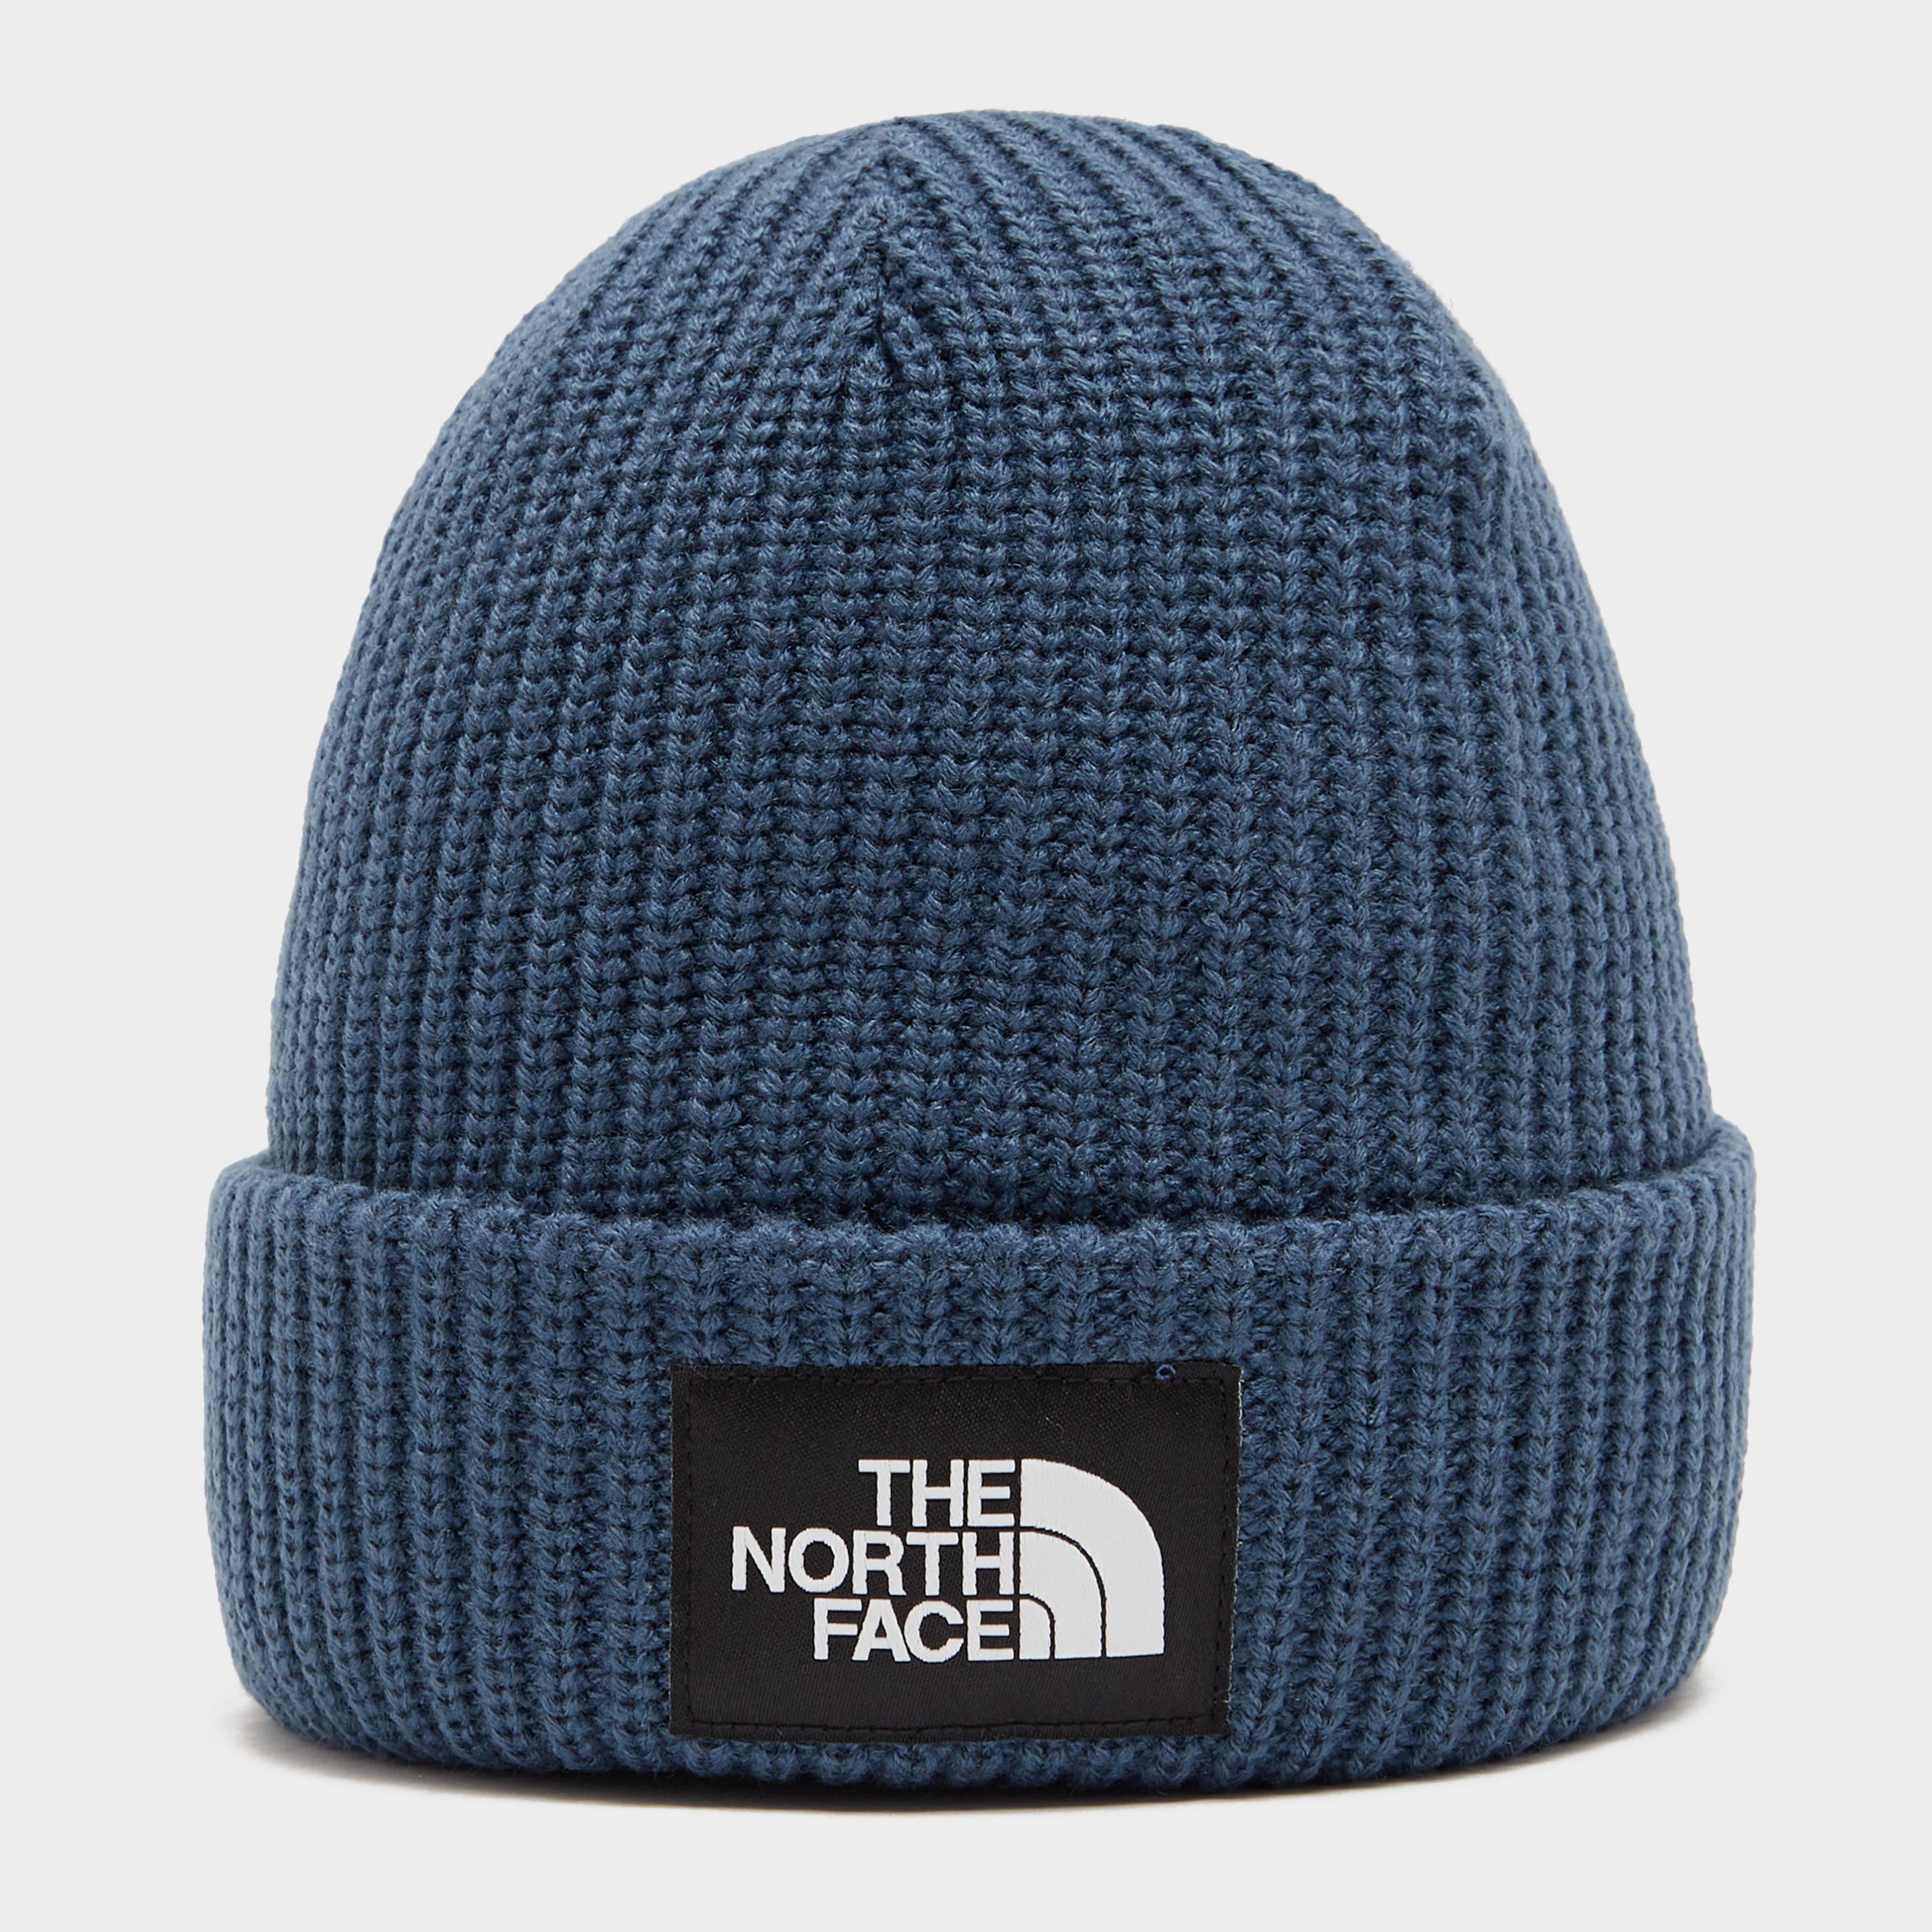 The North Face Mens Salty Dog Beanie  Blue